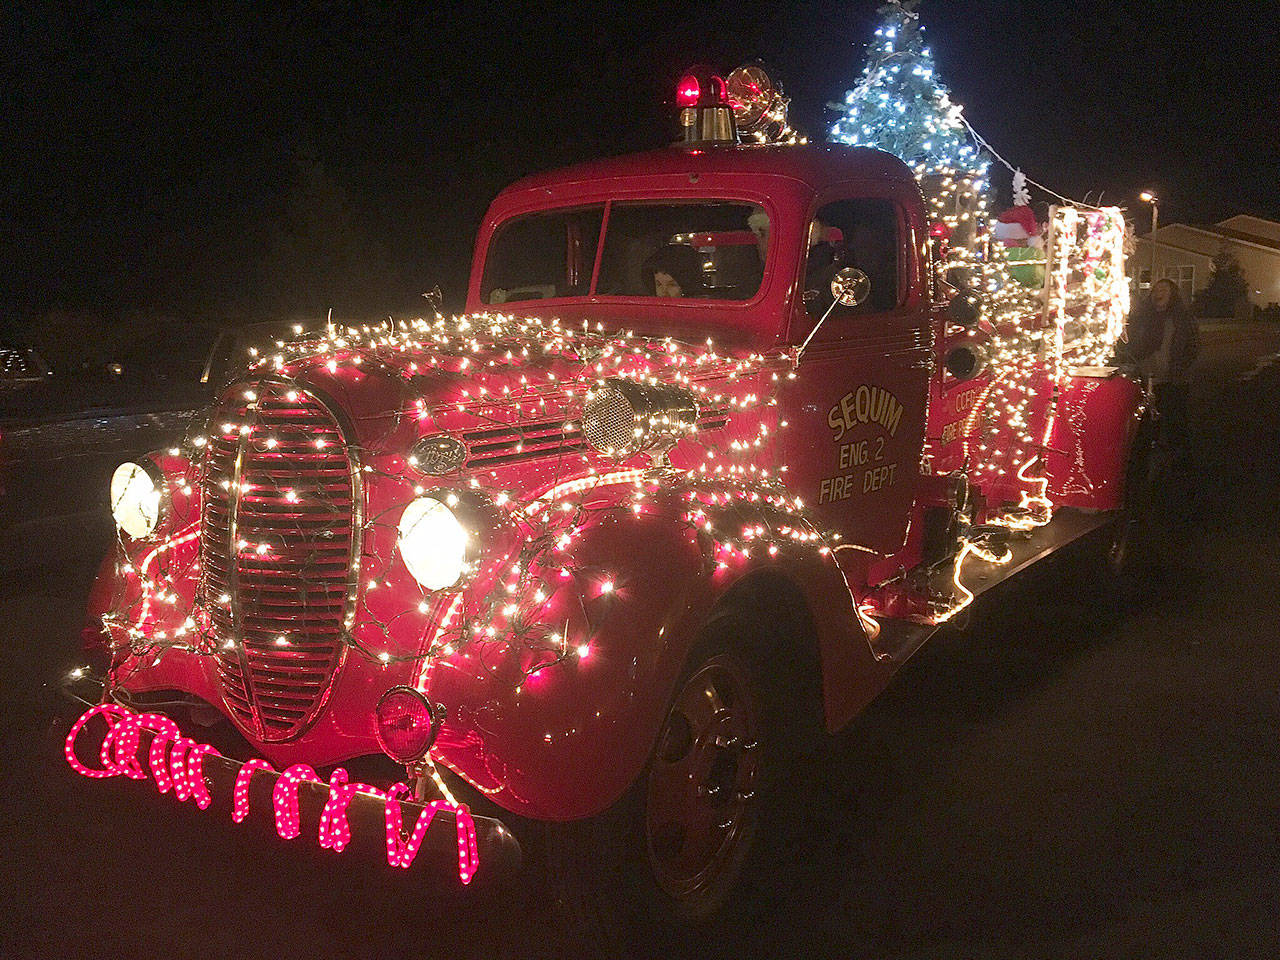 Look for Santa’s Toy & Food Fire Brigade from Dec. 4-7 traveling through Sequim seeking donations for the Sequim Food Bank and Sequim Community Aid’s Toys for Sequim Kids. Submitted photo